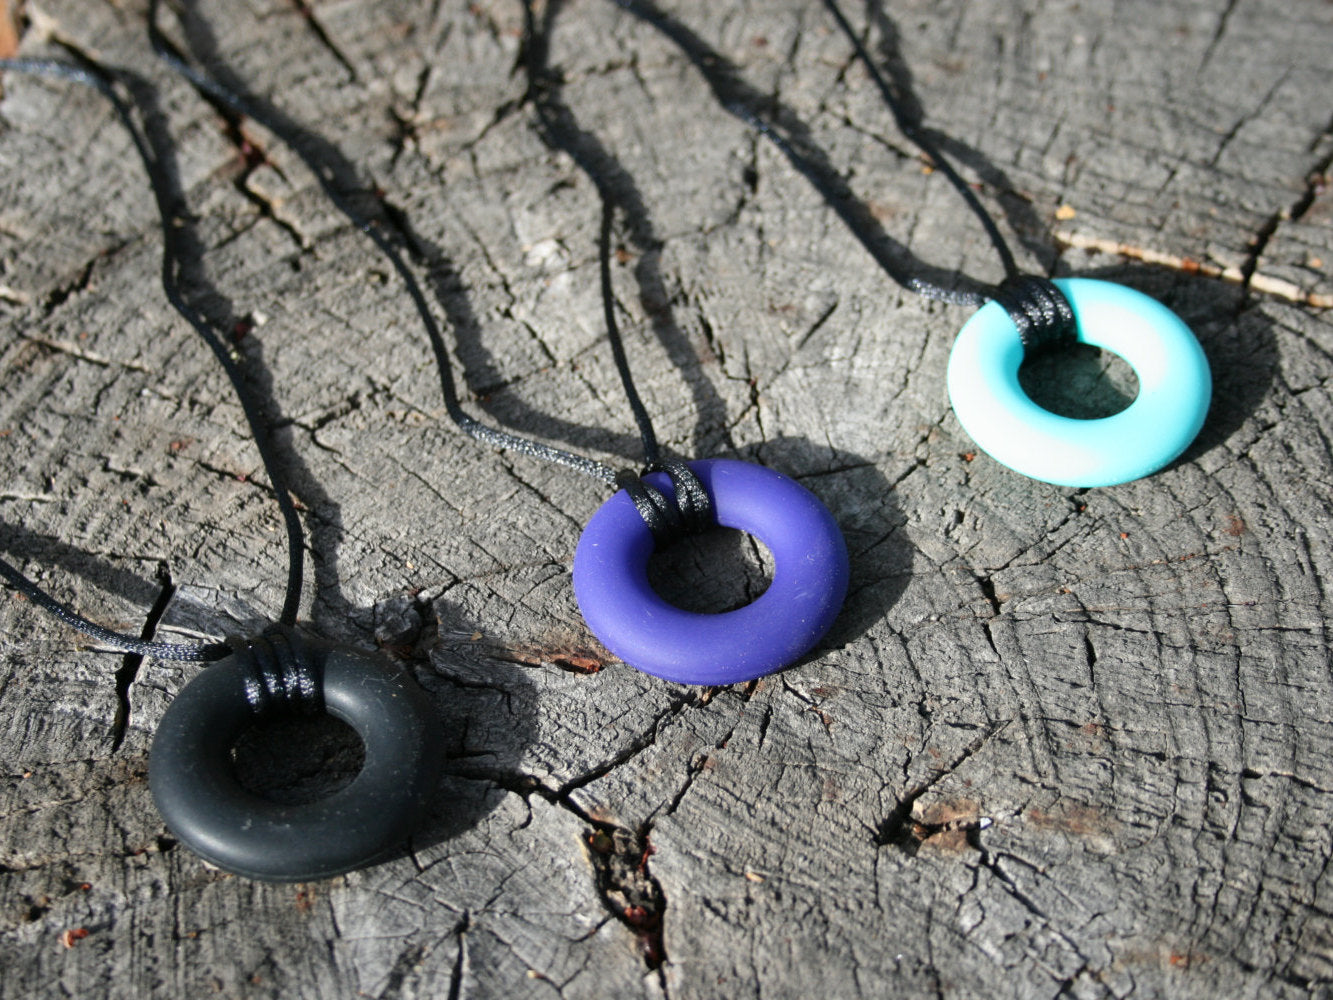 Pictured is variations of sensory Necklaces for Children with Chewable Circle Pendant - available in 3 colors: black, turquoise, and navy blue! Measures Approximately 18" - This pendant and is made from food-grade silicone, strung on a nylon cord, and finished off with a plastic clasp designed to pop open when pulled really hard. (Jewelry on wooden background)  